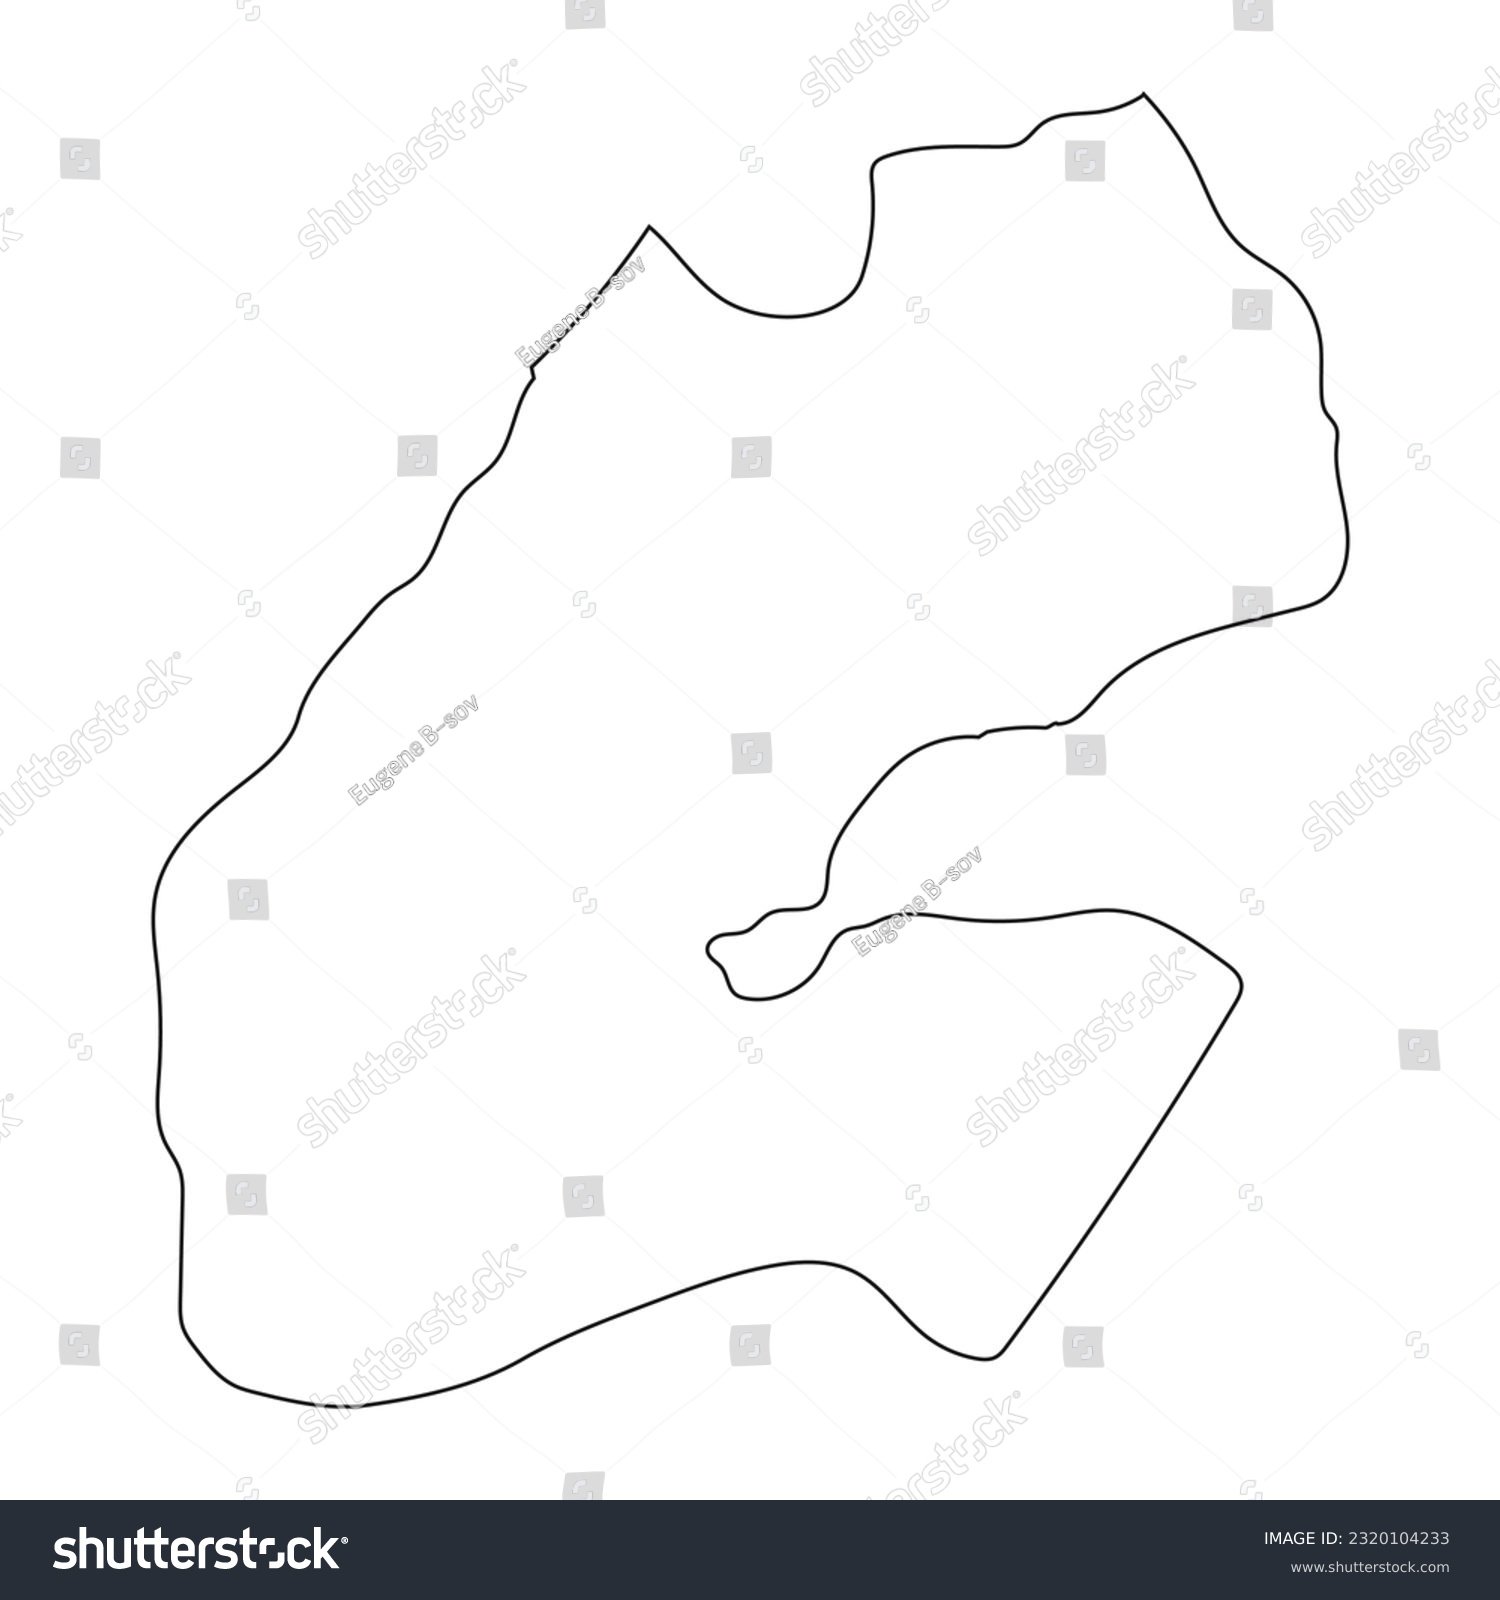 SVG of Highly detailed Djibouti map with borders isolated on background svg